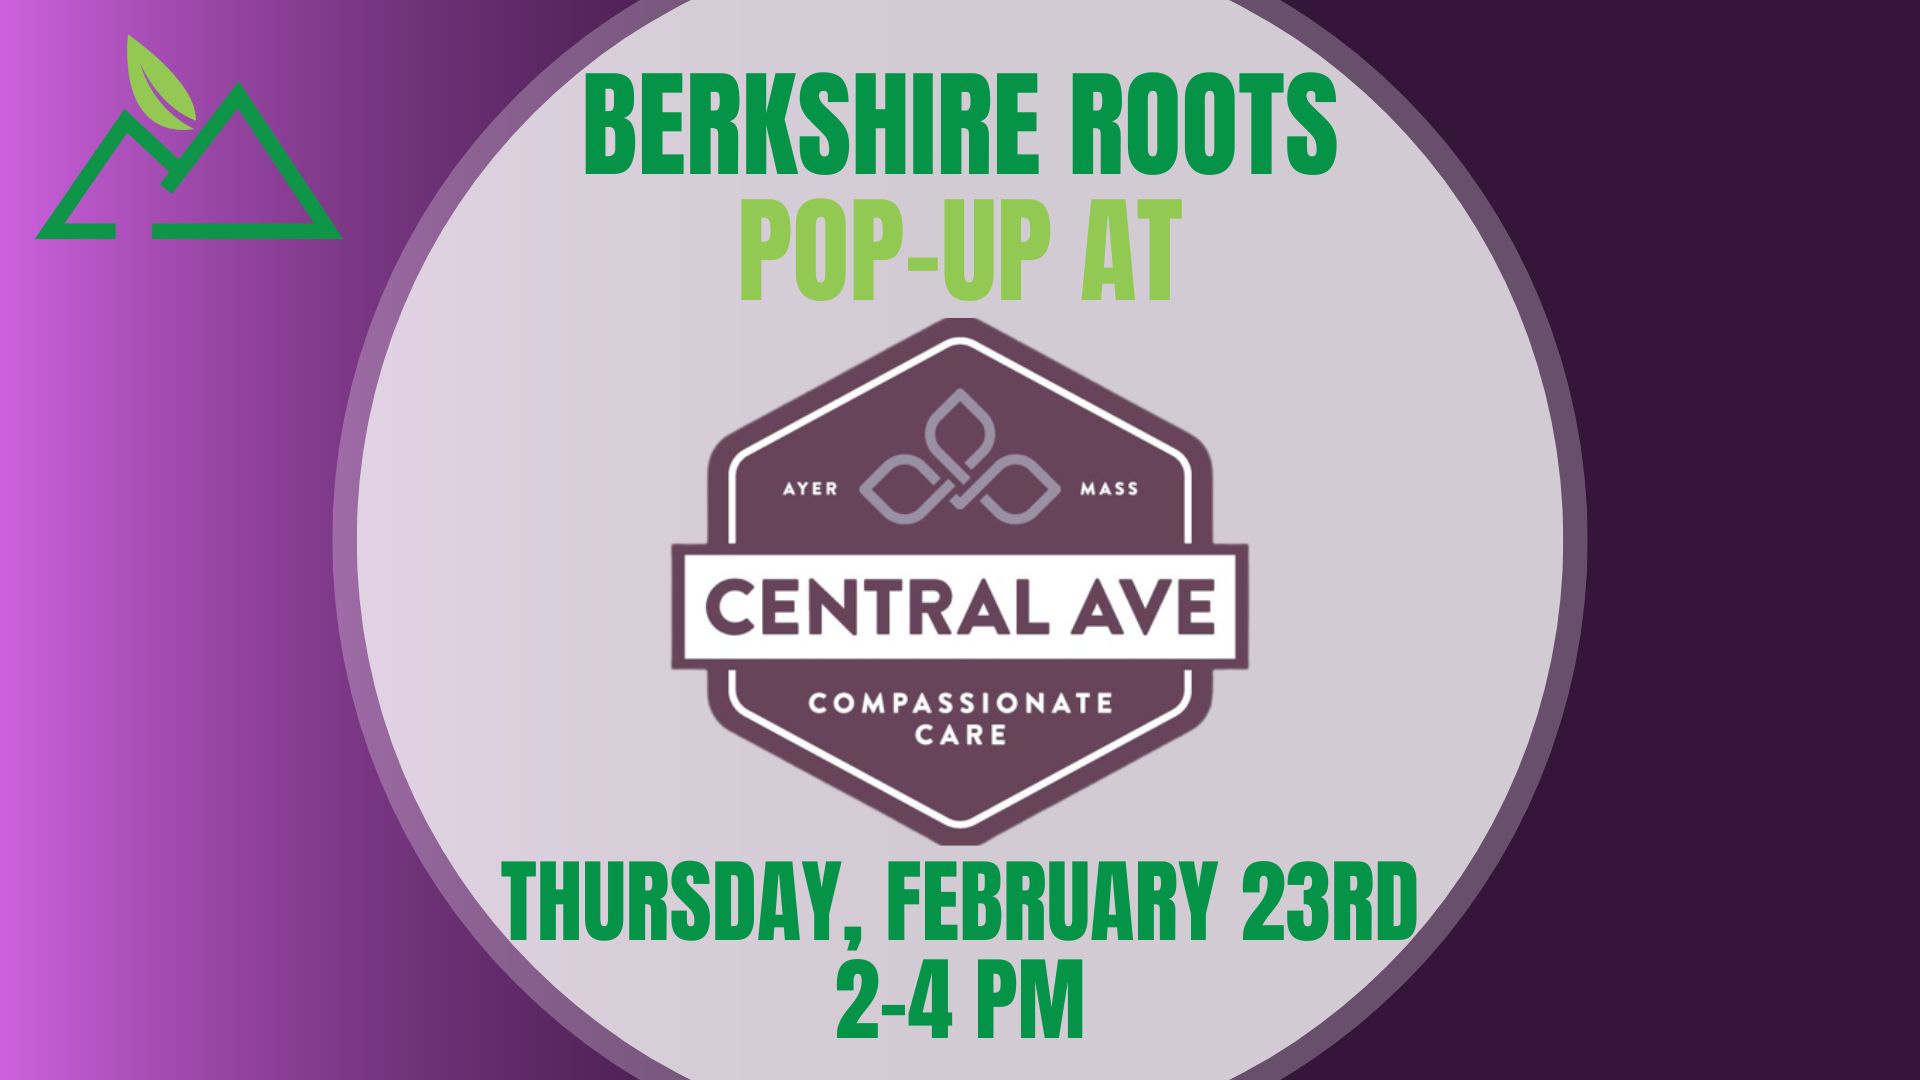 Berkshire Roots popup at Central Ave Alternative Care